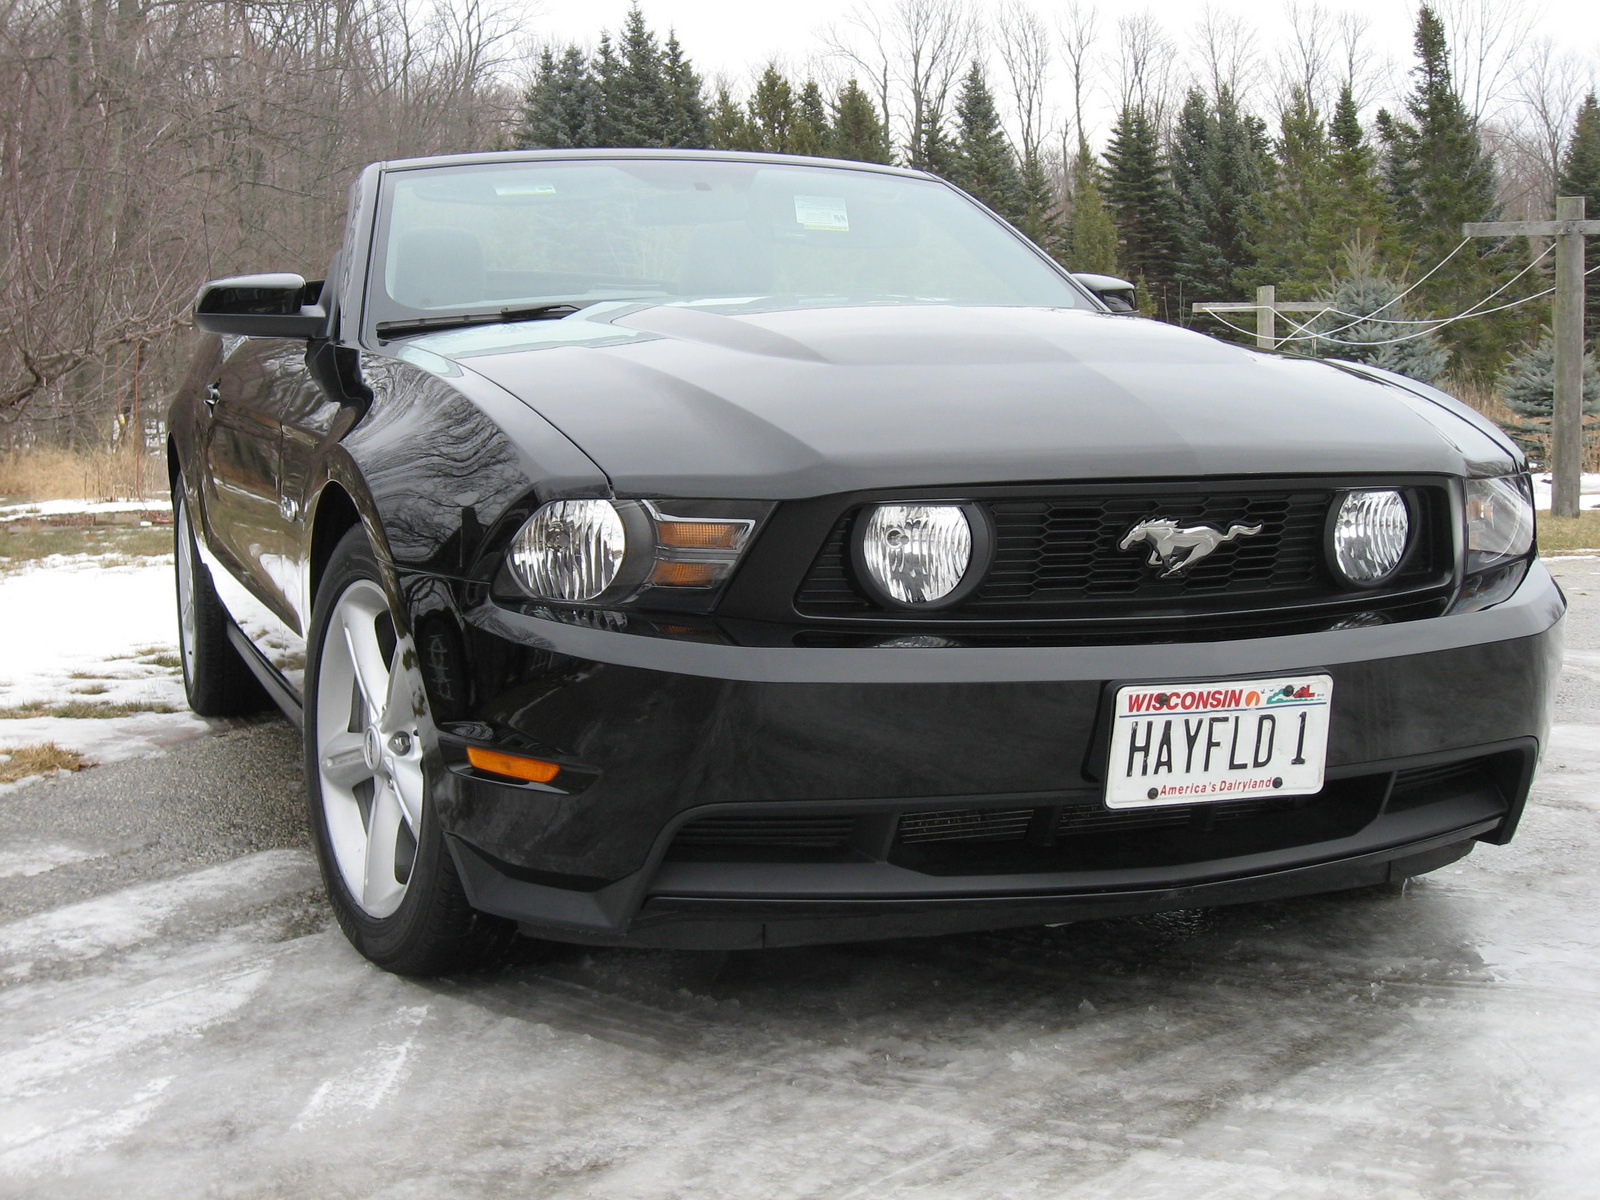 2005 Ford mustang owner manual #6